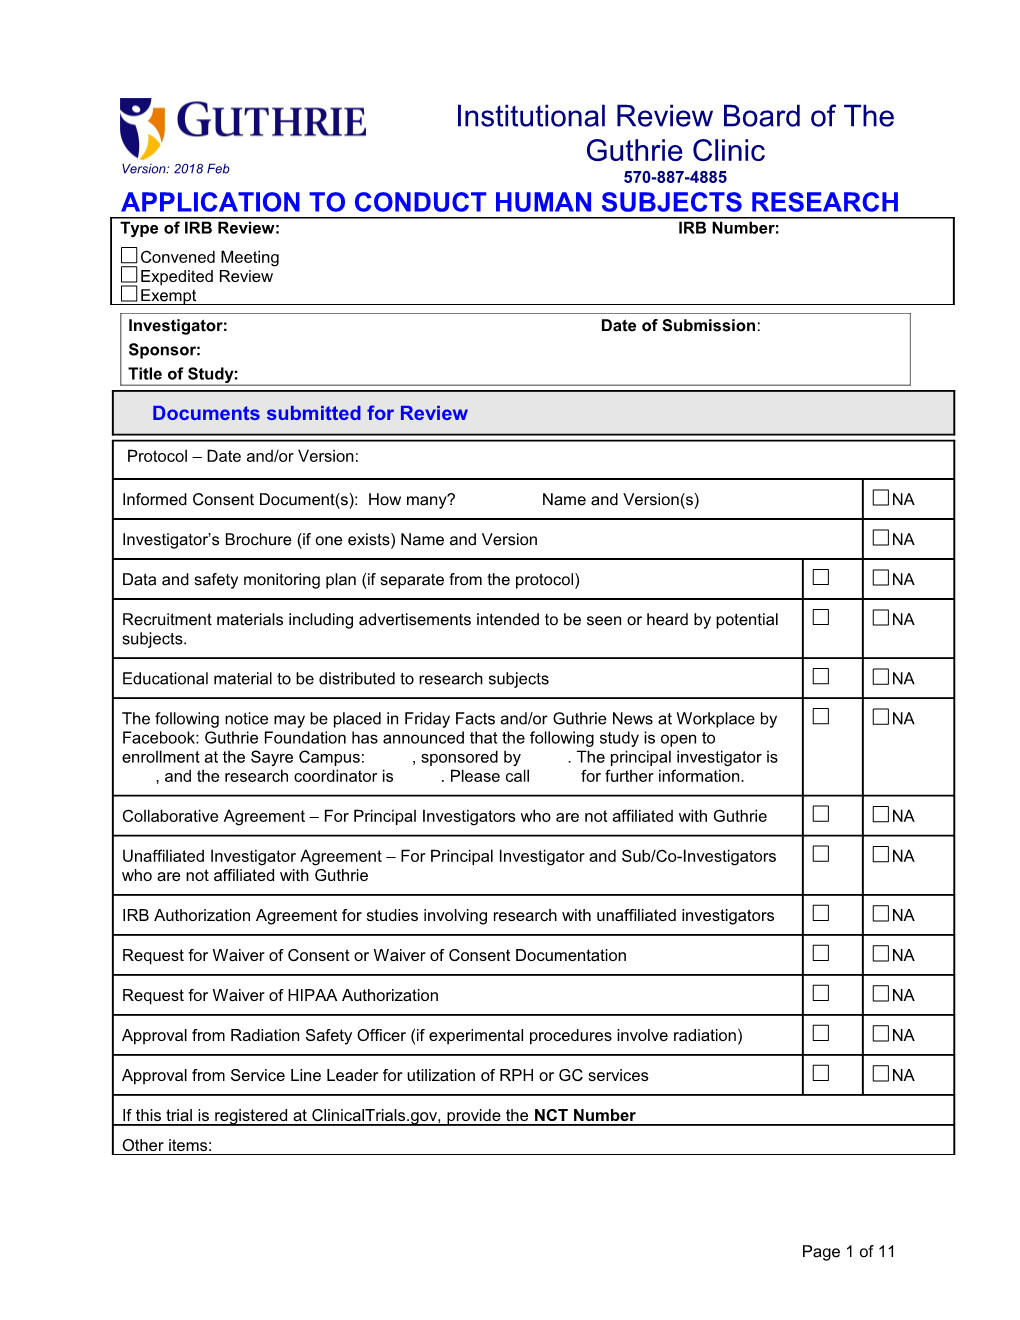 Application to Conduct Human Subjects Research